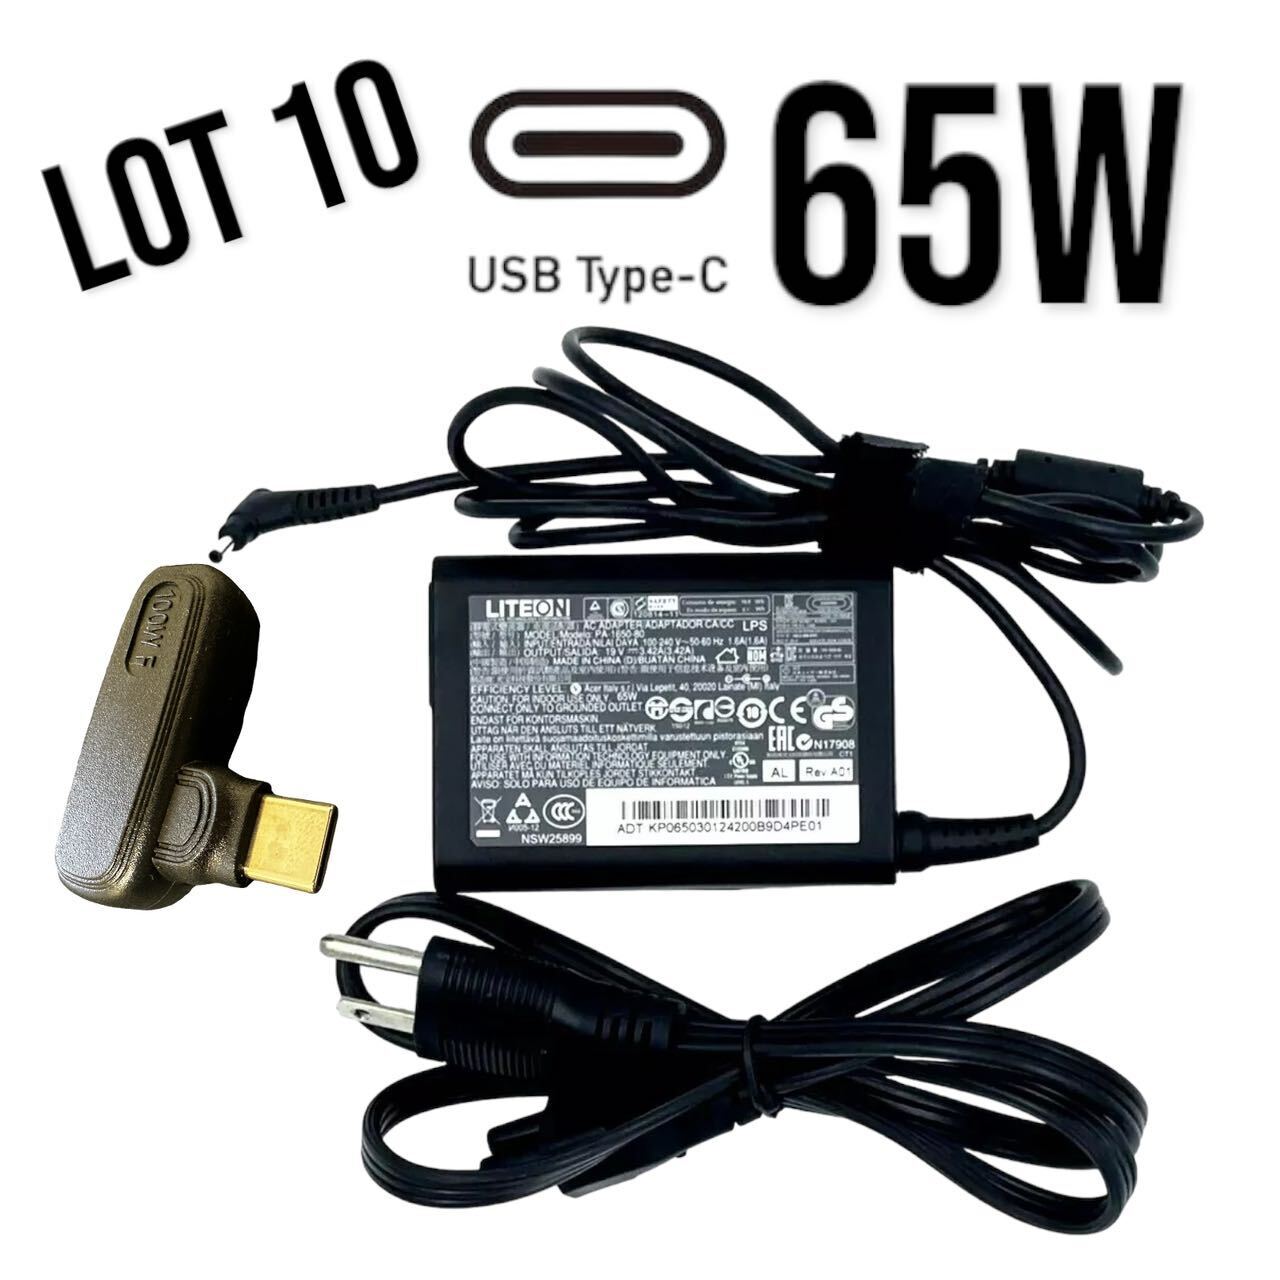 Lot 10 LITEON OEM 65W USB Type C Adapter ASUS Chromebook 11A MacBook Surface Go